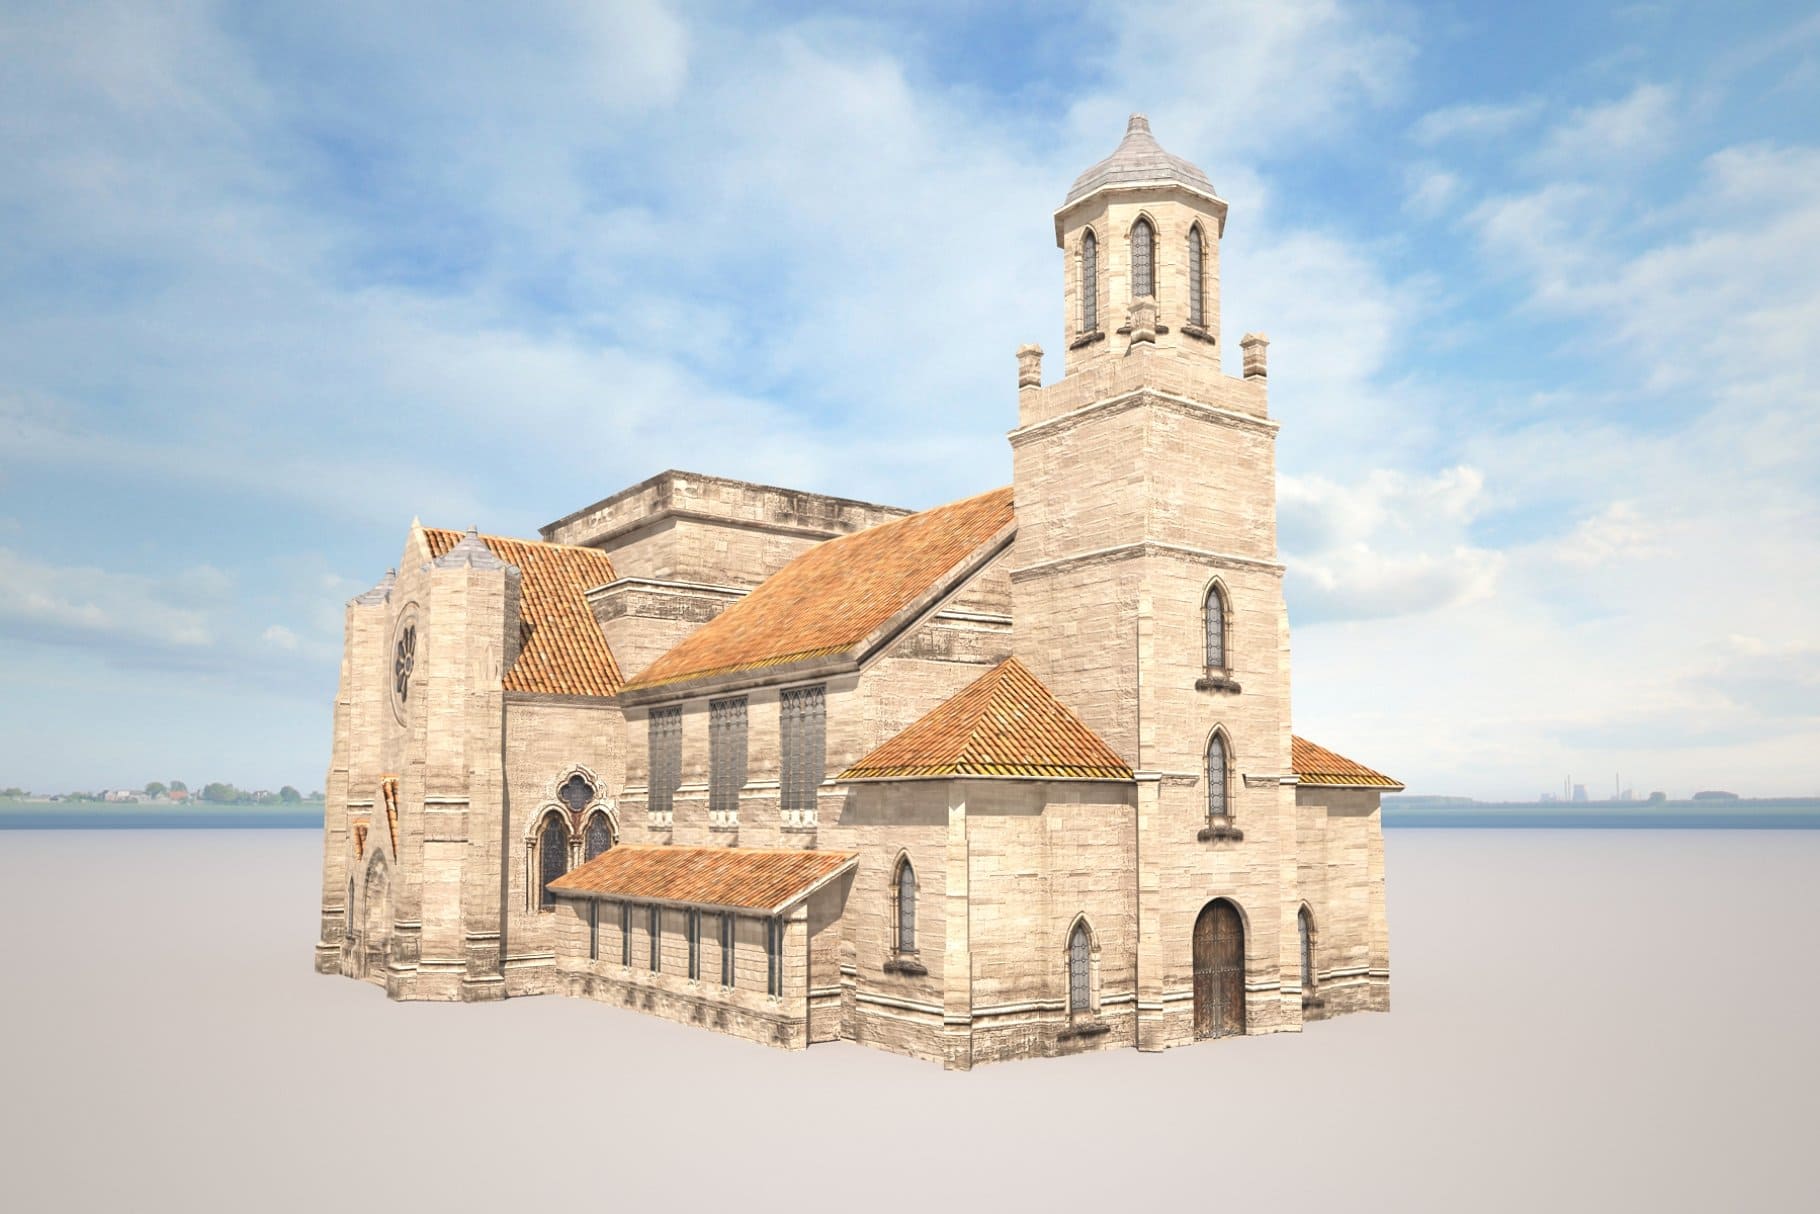 3D model of a church building with ancient doors.